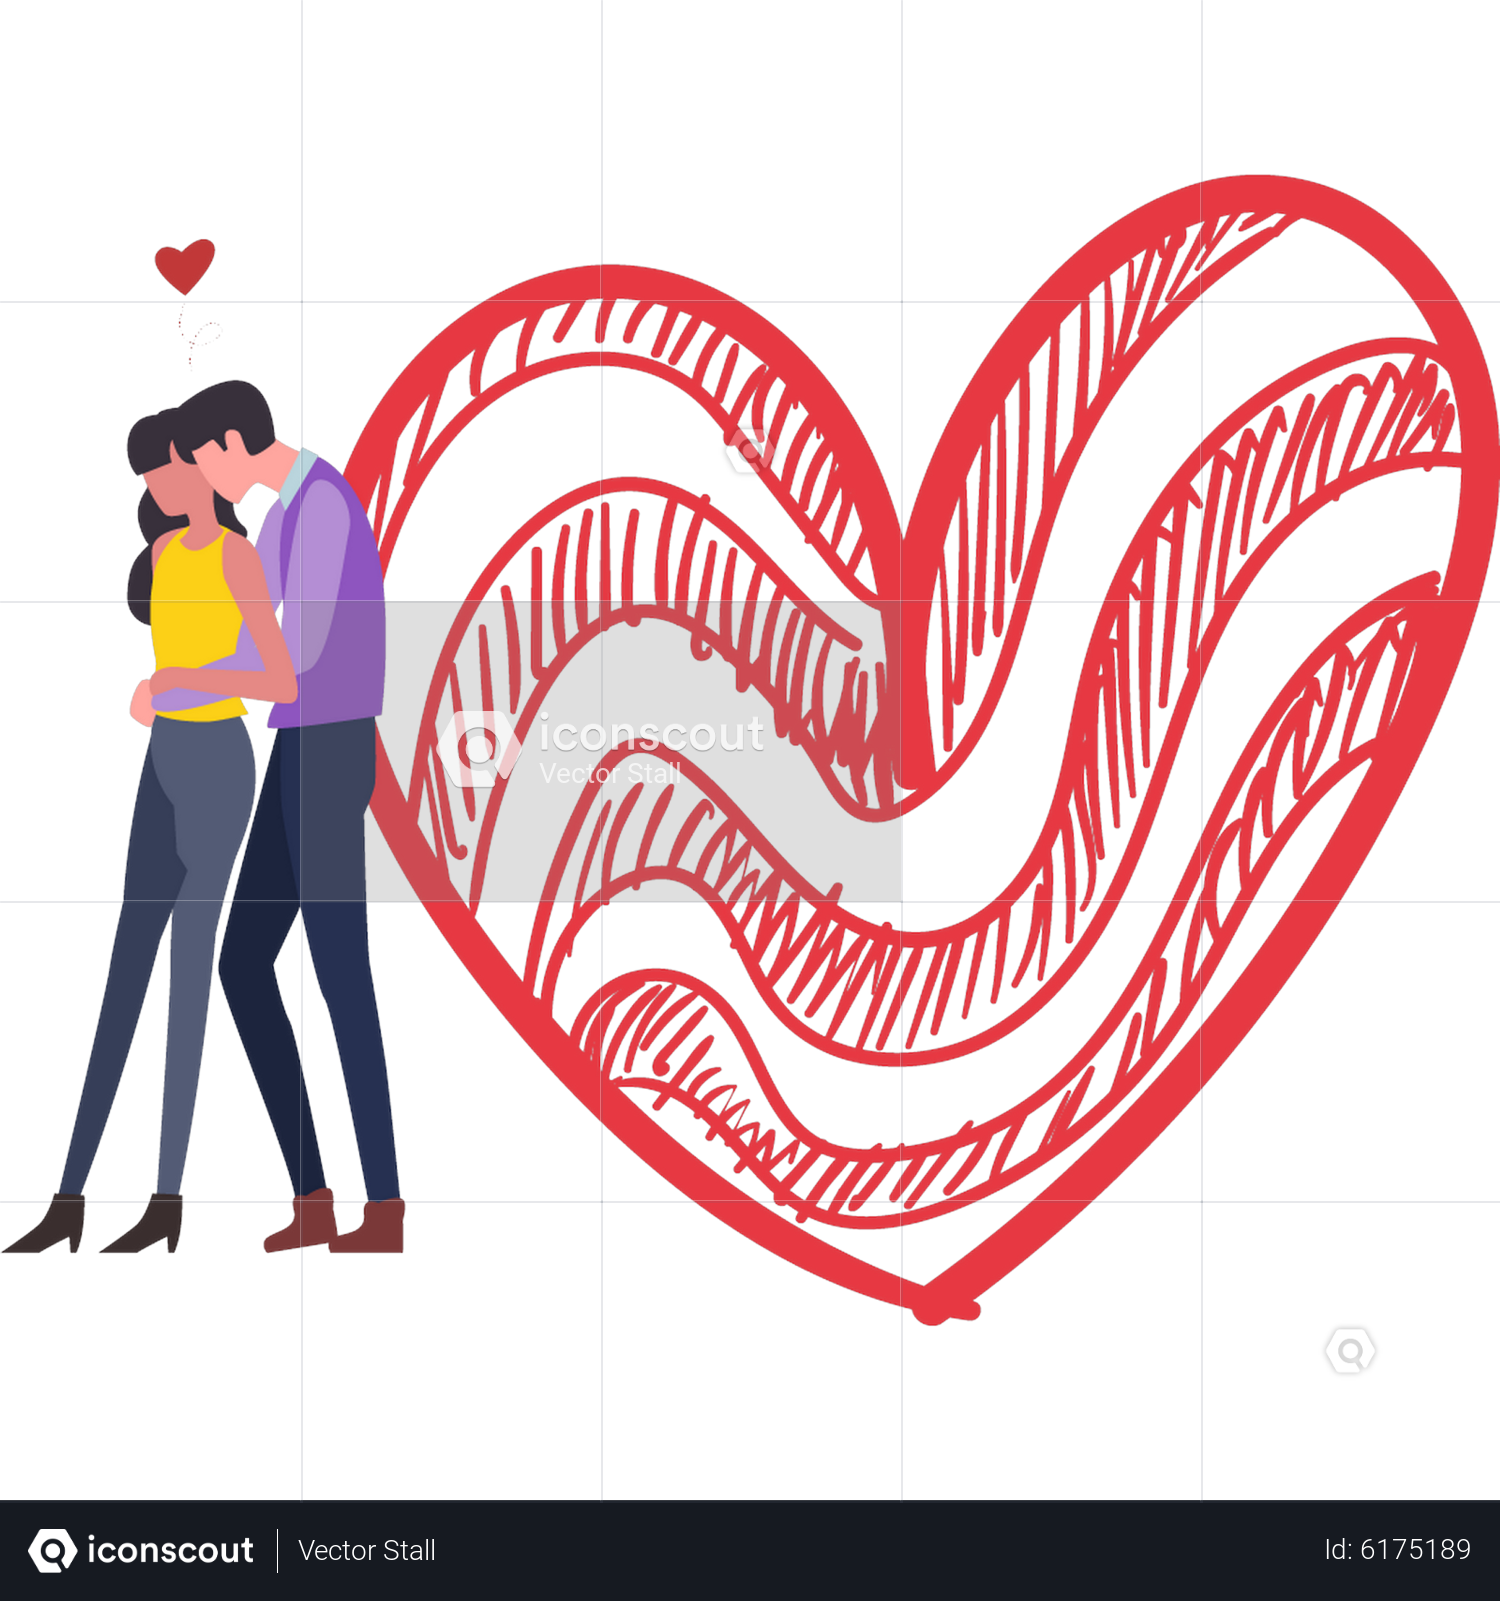 Best Couple standing in romantic pose Illustration download in PNG & Vector  format